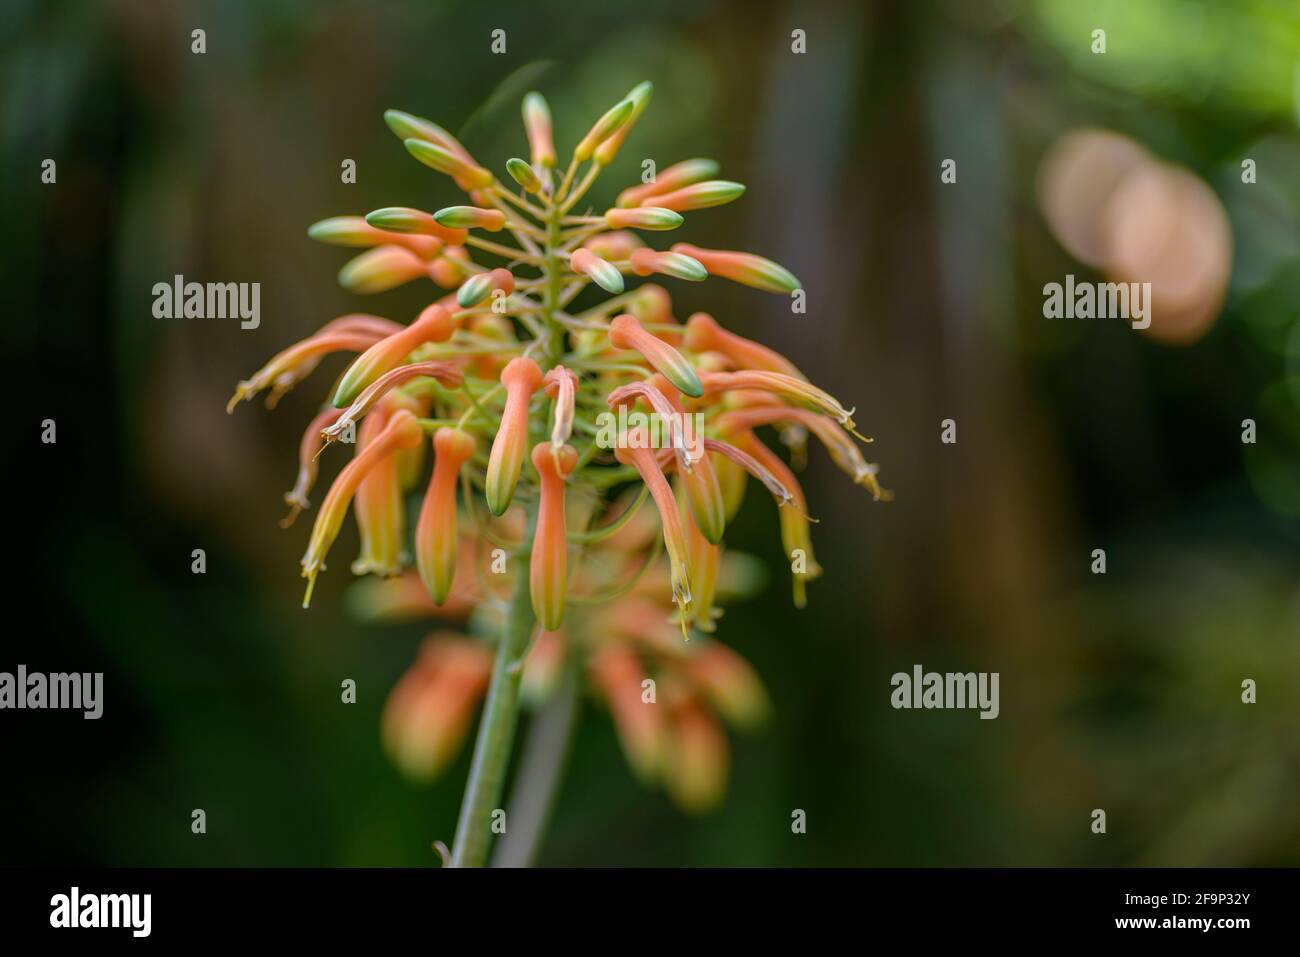 Flowers of aloe. Selective focus with shallow depth of field. Stock Photo